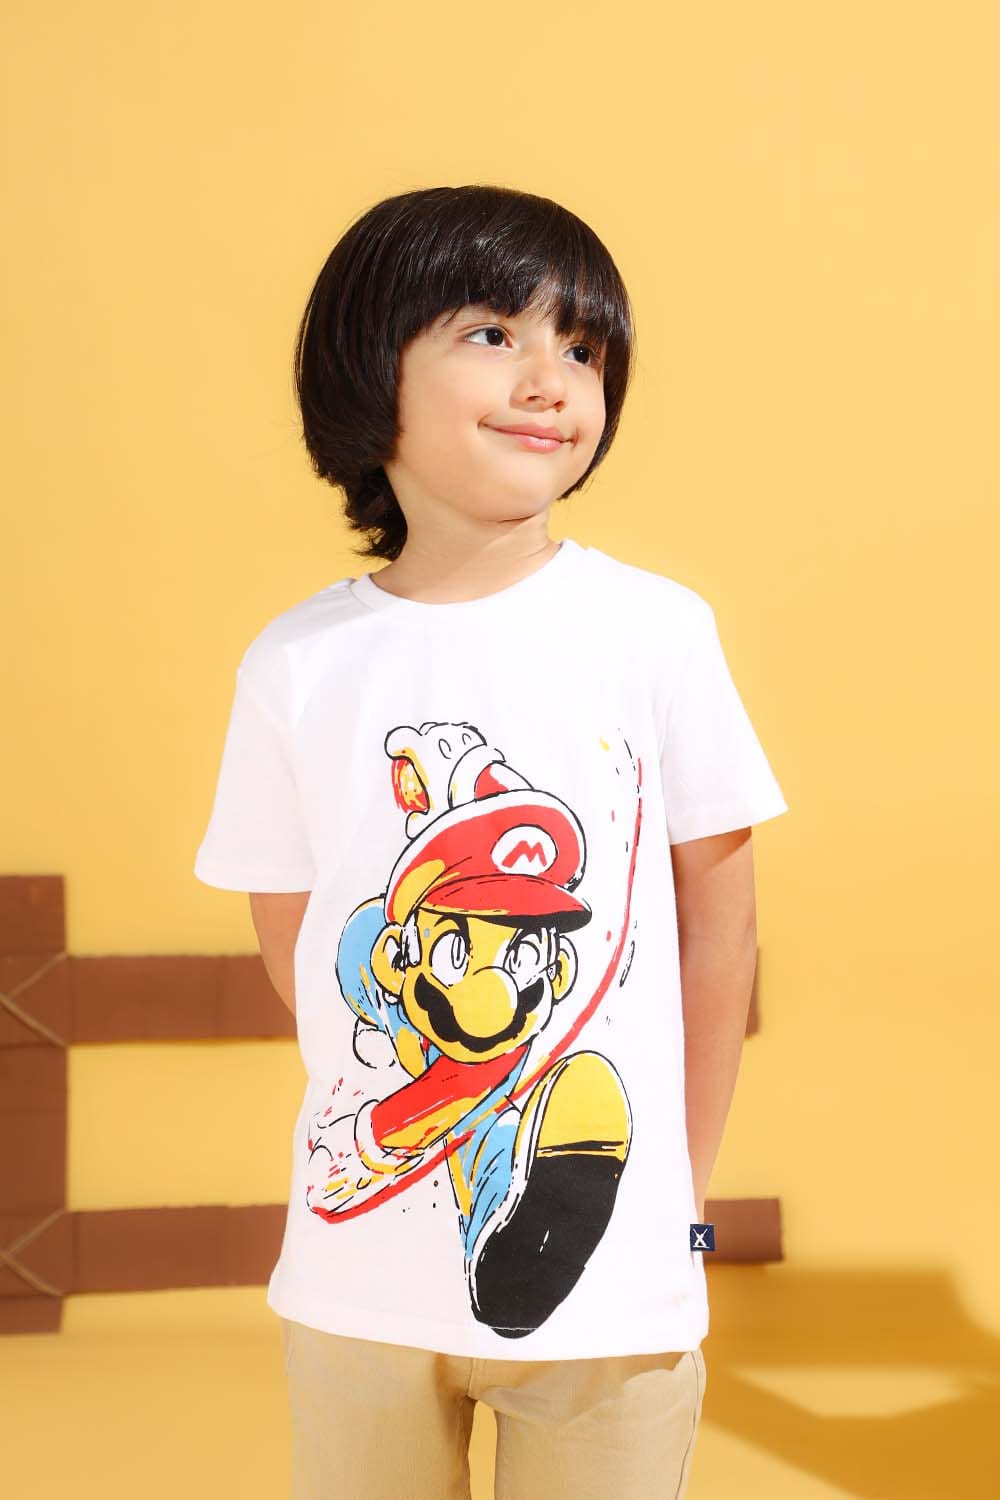 Hope Not Out by Shahid Afridi Boys Knit T-Shirt White Half Sleeve T-Shirt with Super Mario Graphic